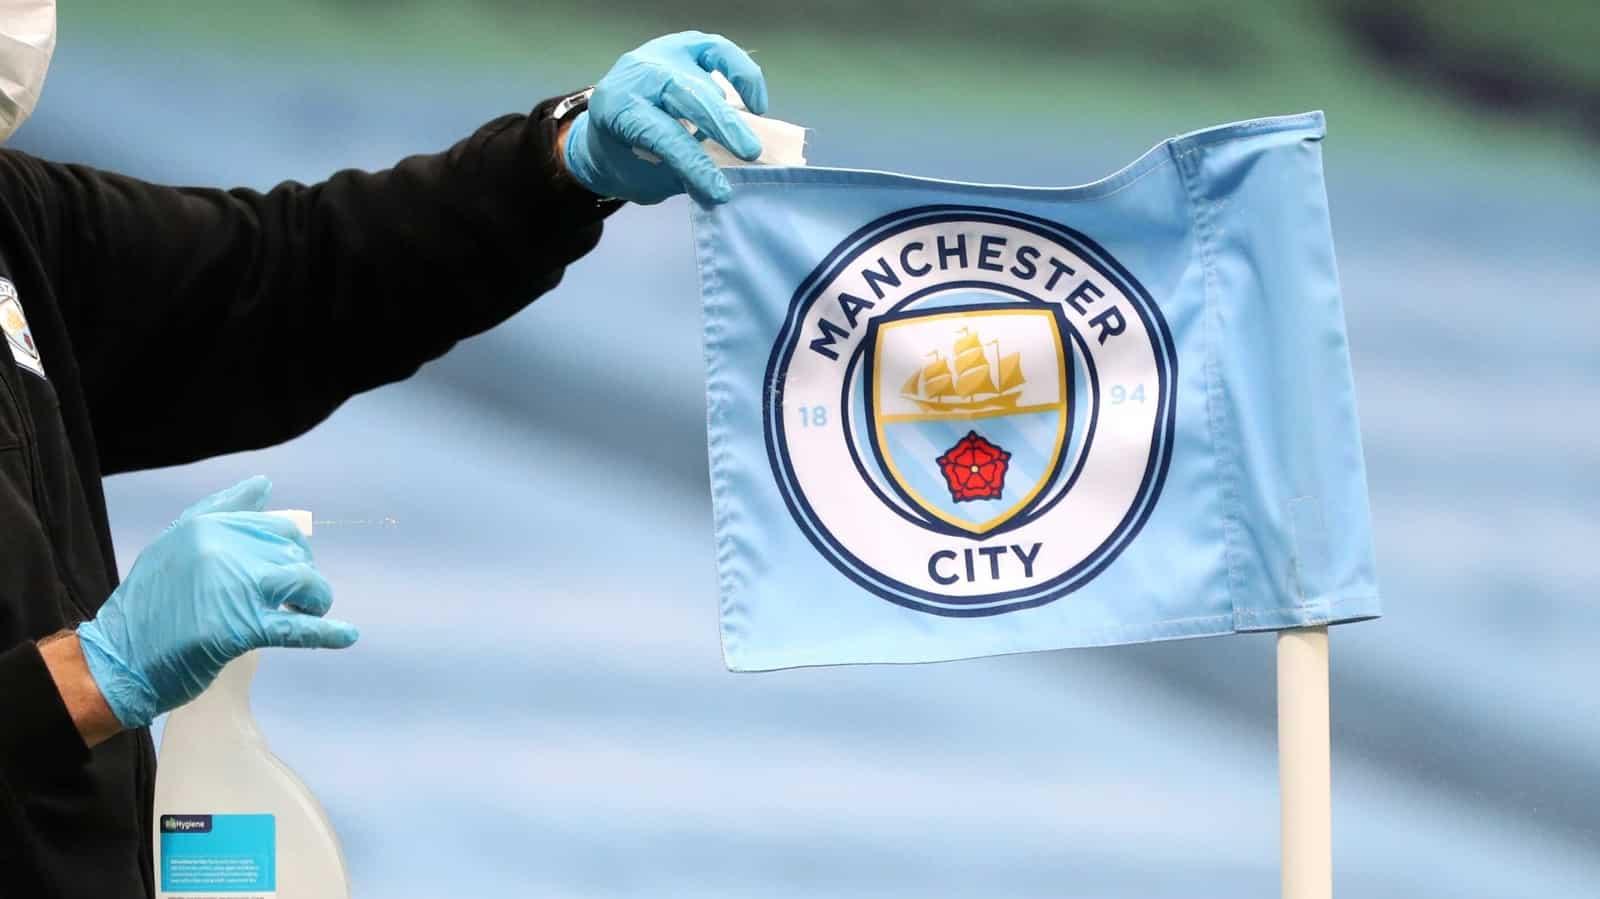 Man City case could join list of soccers biggest scandals